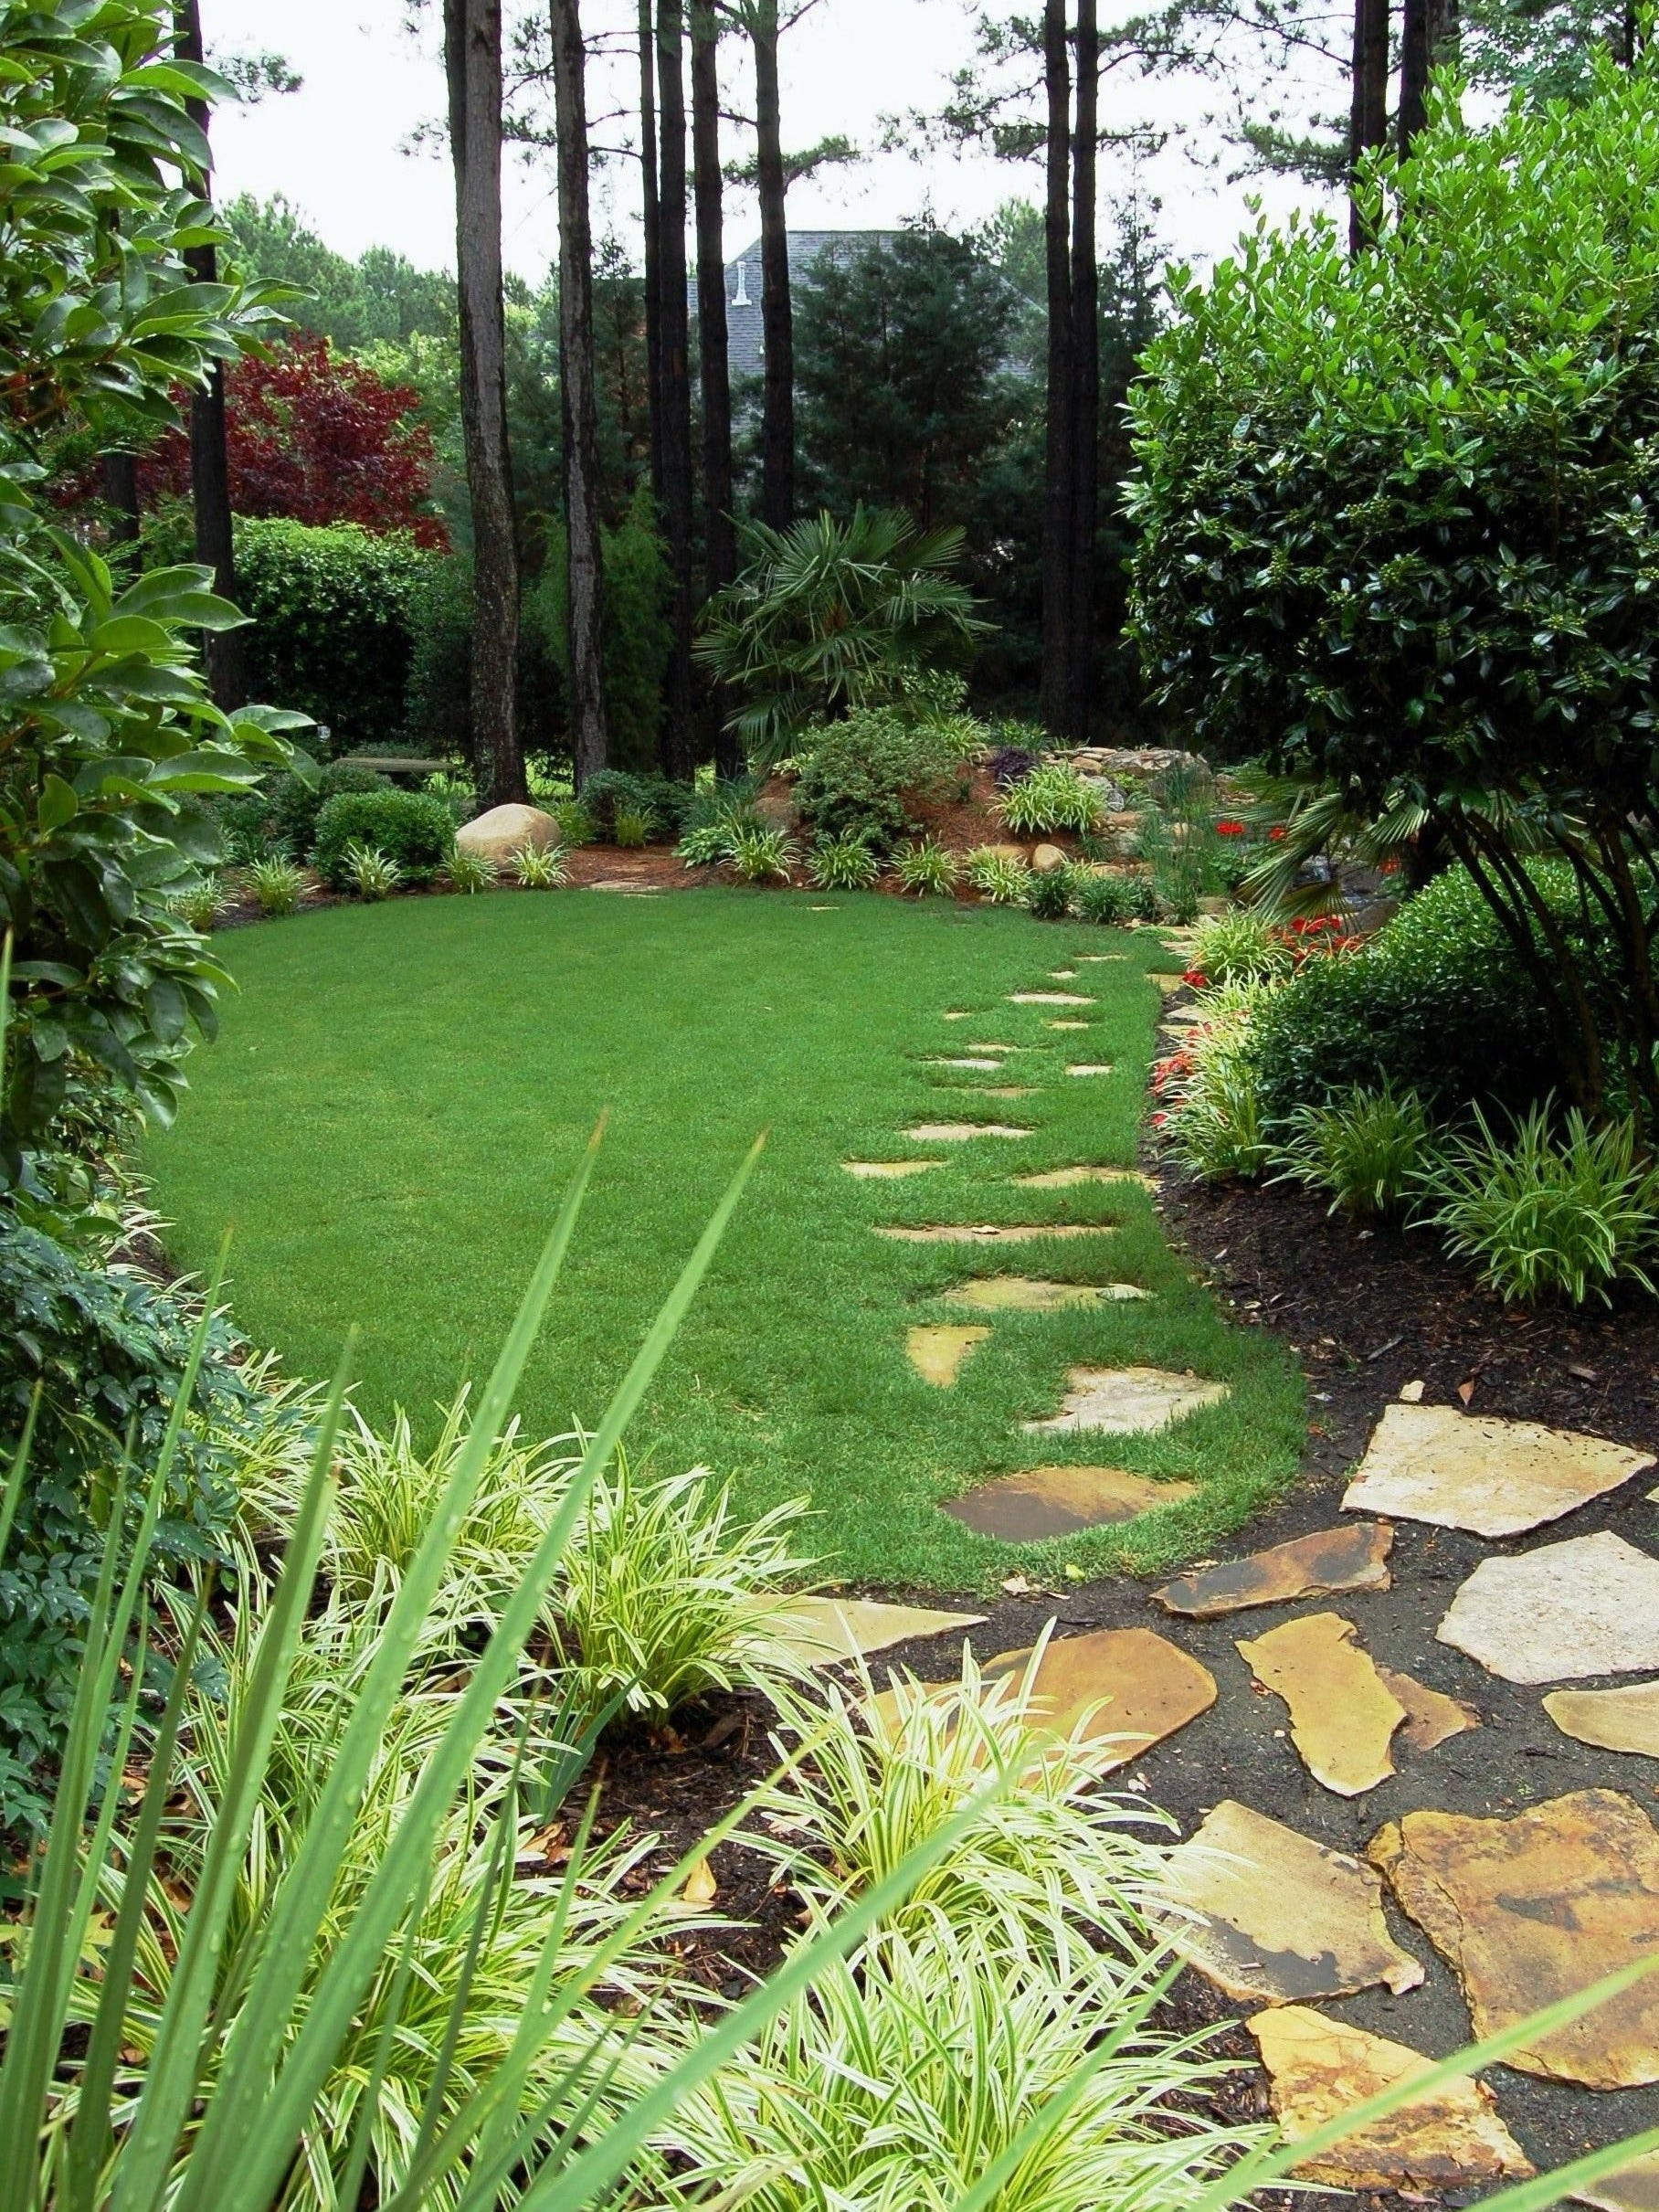 You're edging the grass around your garden beds wrong. Here are 4 ways to get it right